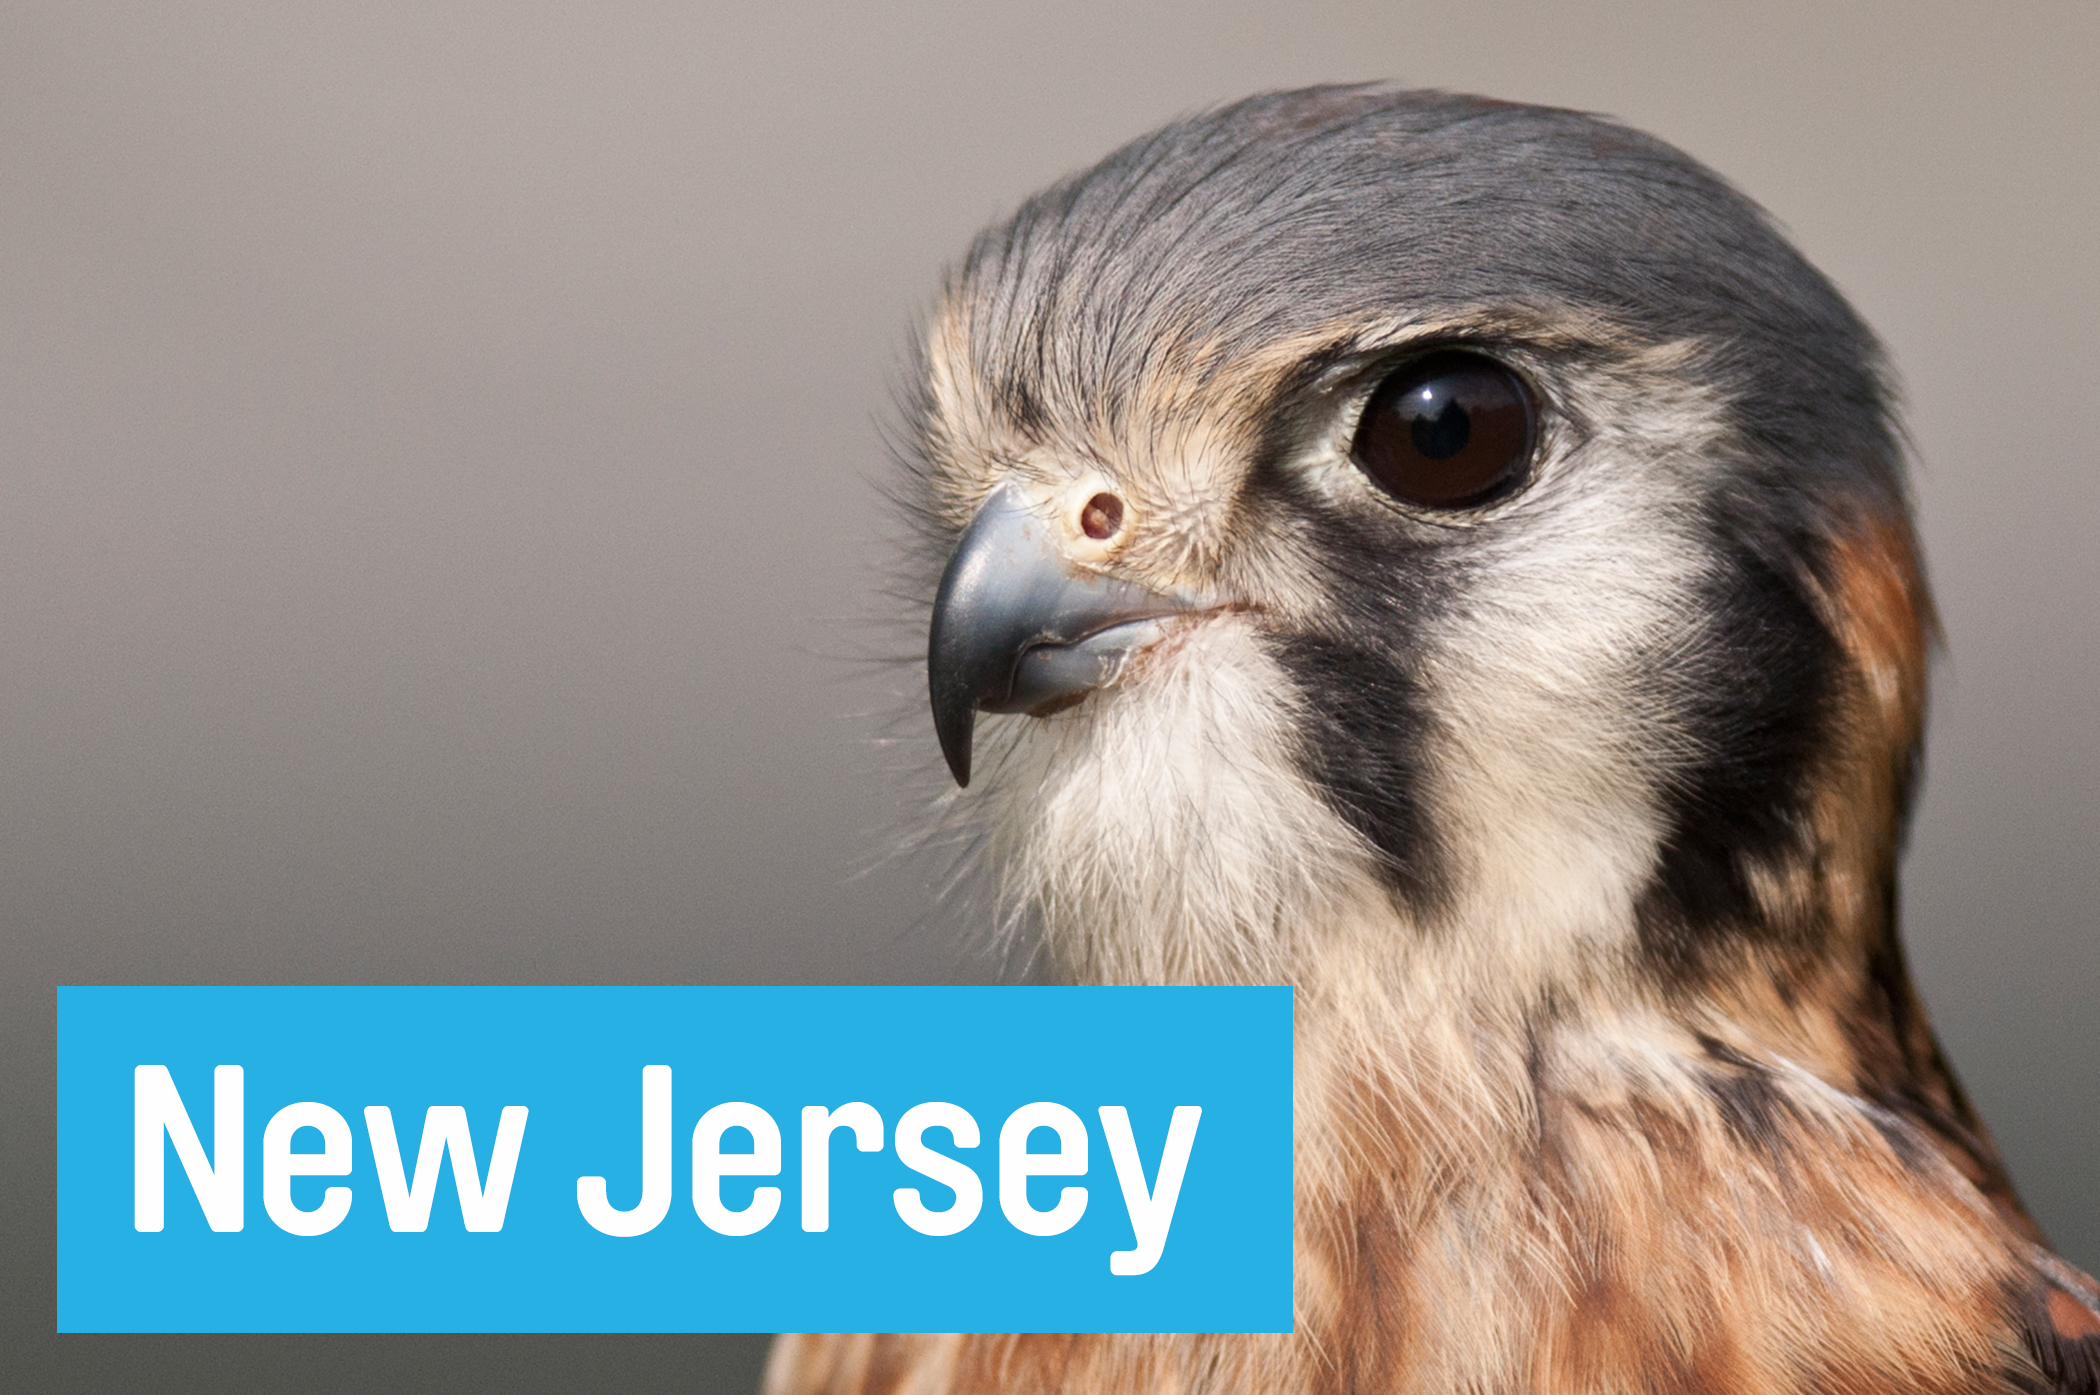 Take a detour off the turnpike and say hello to the resident barred owl, peregrine falcon, and eastern screech owl at <a href="//theraptortrust.org/&quot;" target="_blank"> New Jersey Raptor Trust</a>, a hospital for birds of prey. In Millington, about 30 miles off exit 12.